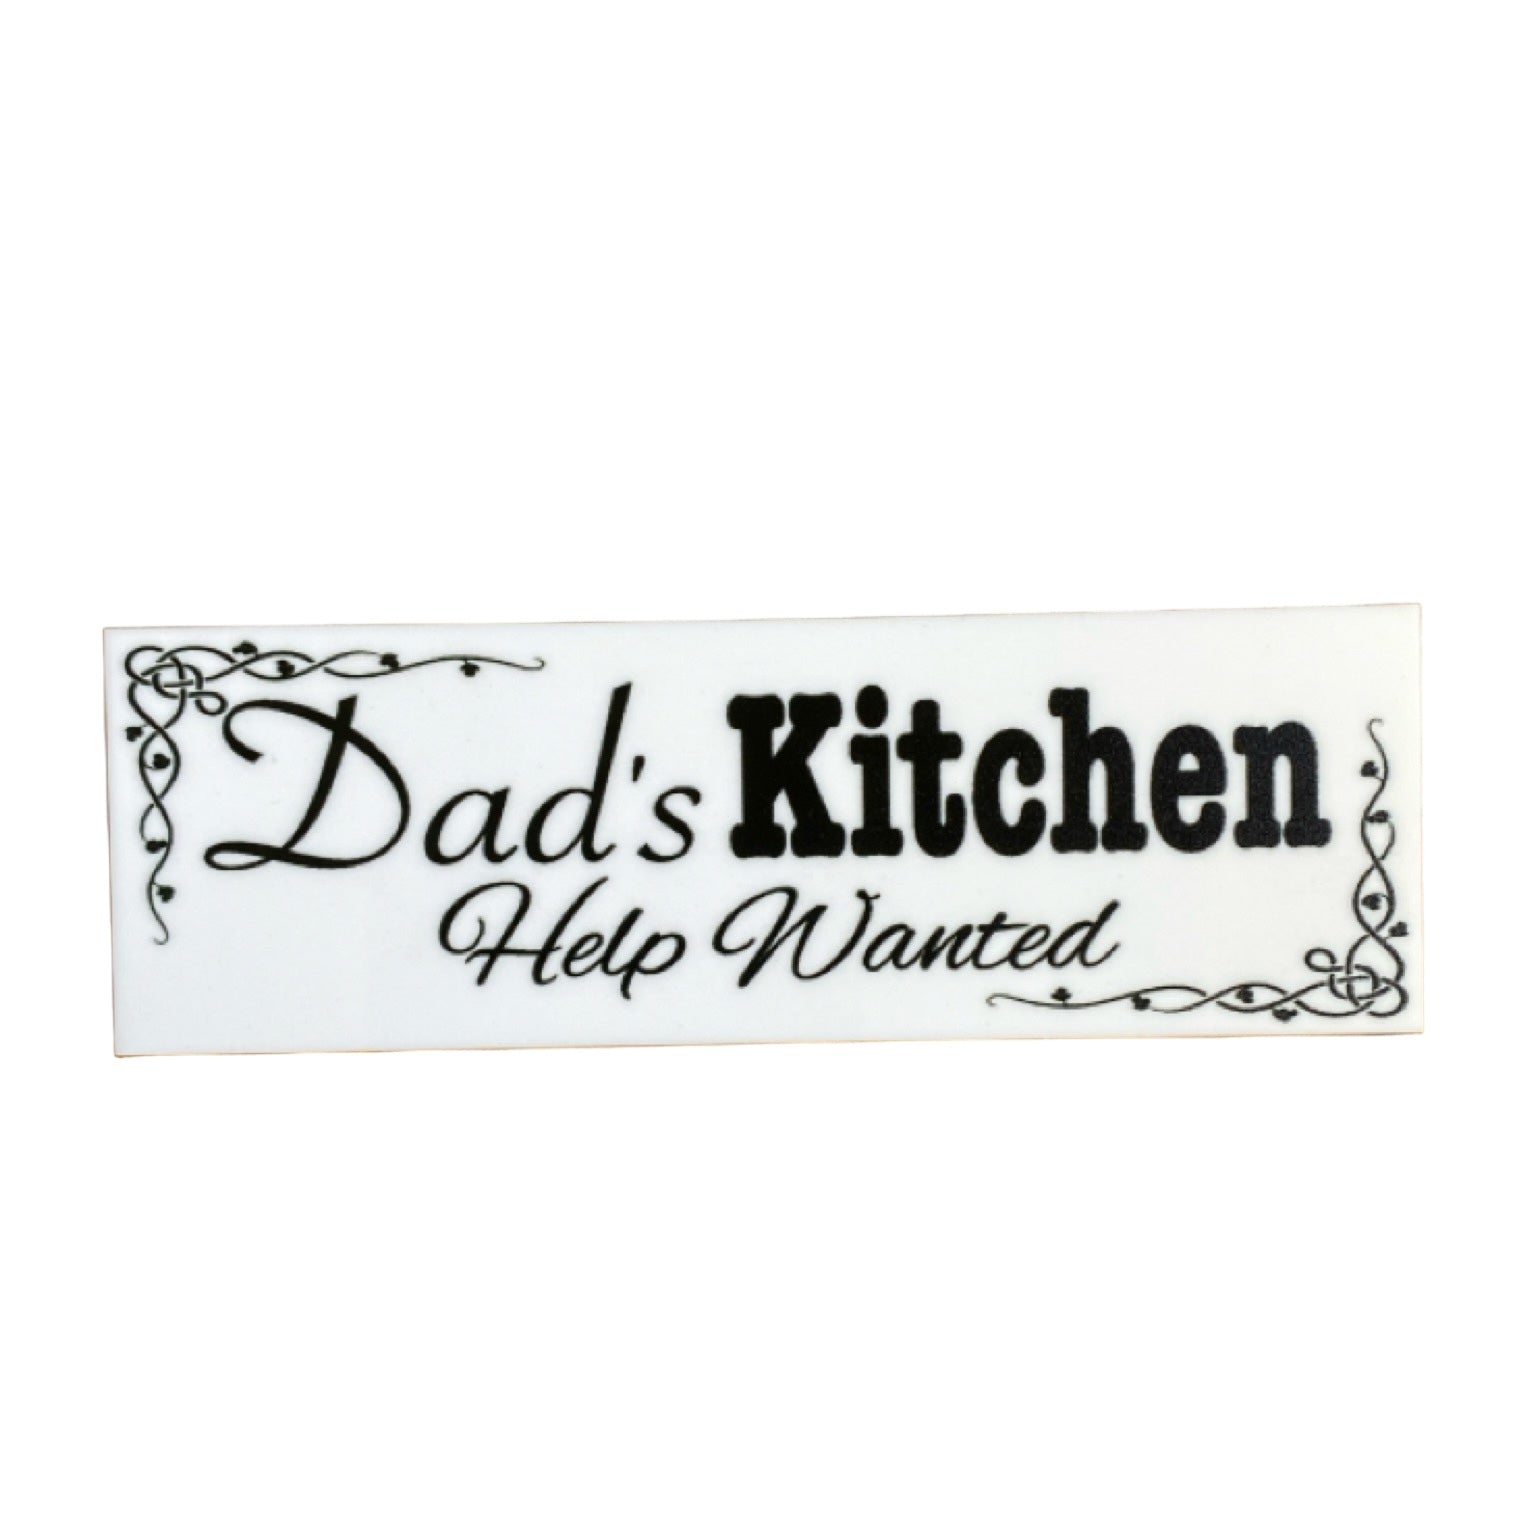 Dad's Kitchen Help Wanted Sign - The Renmy Store Homewares & Gifts 